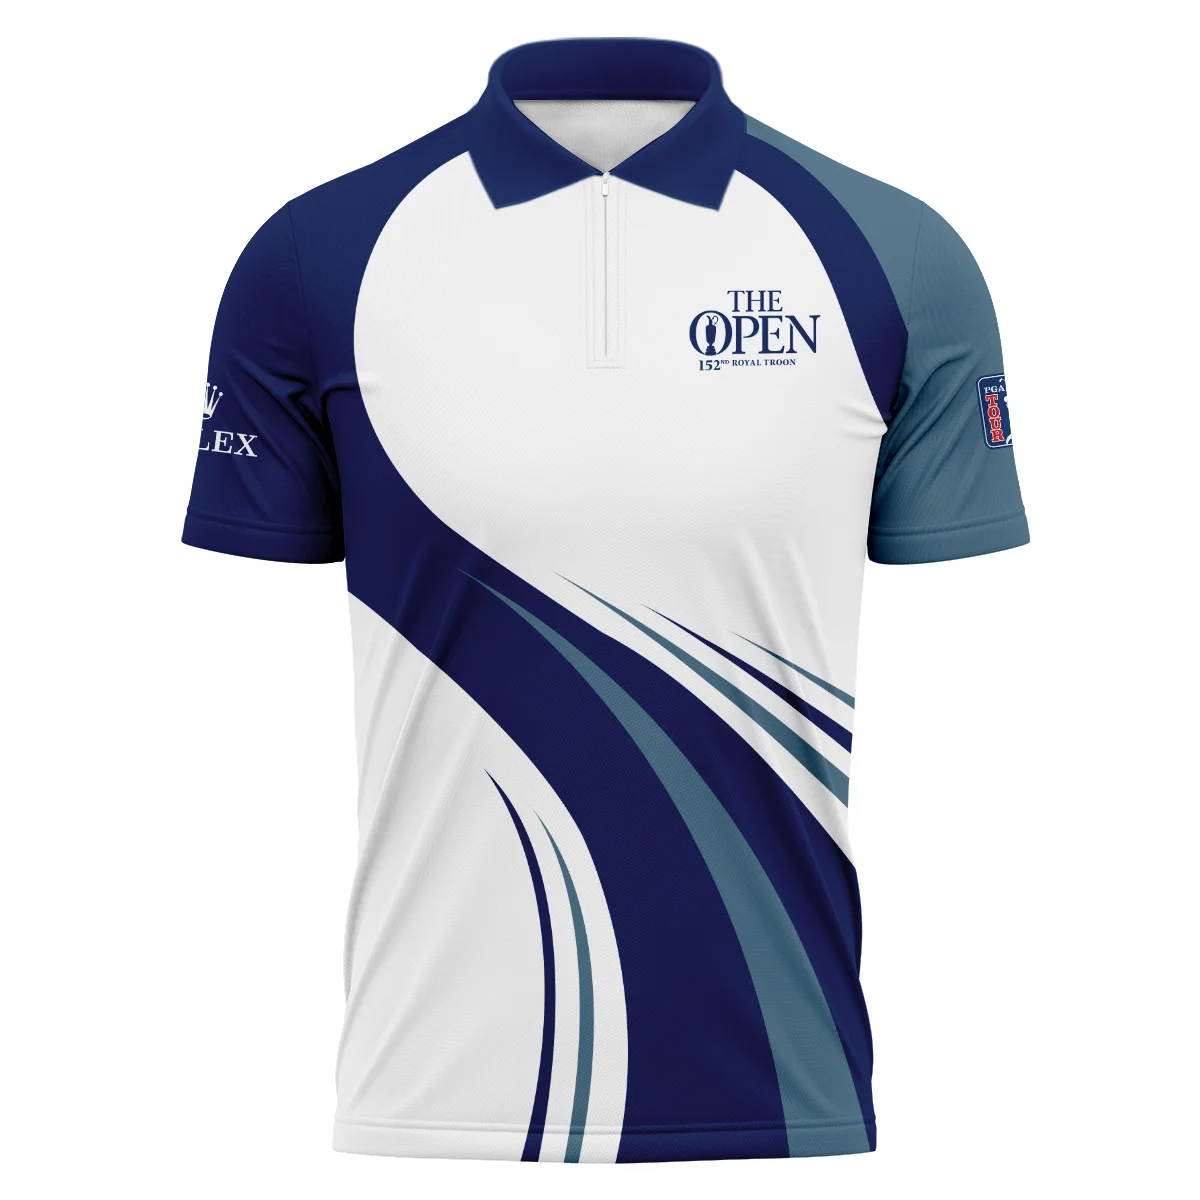 152nd Open Championship Rolex White Mostly Desaturated Dark Blue Polo Shirt All Over Prints HOTOP270624A02ROXPL